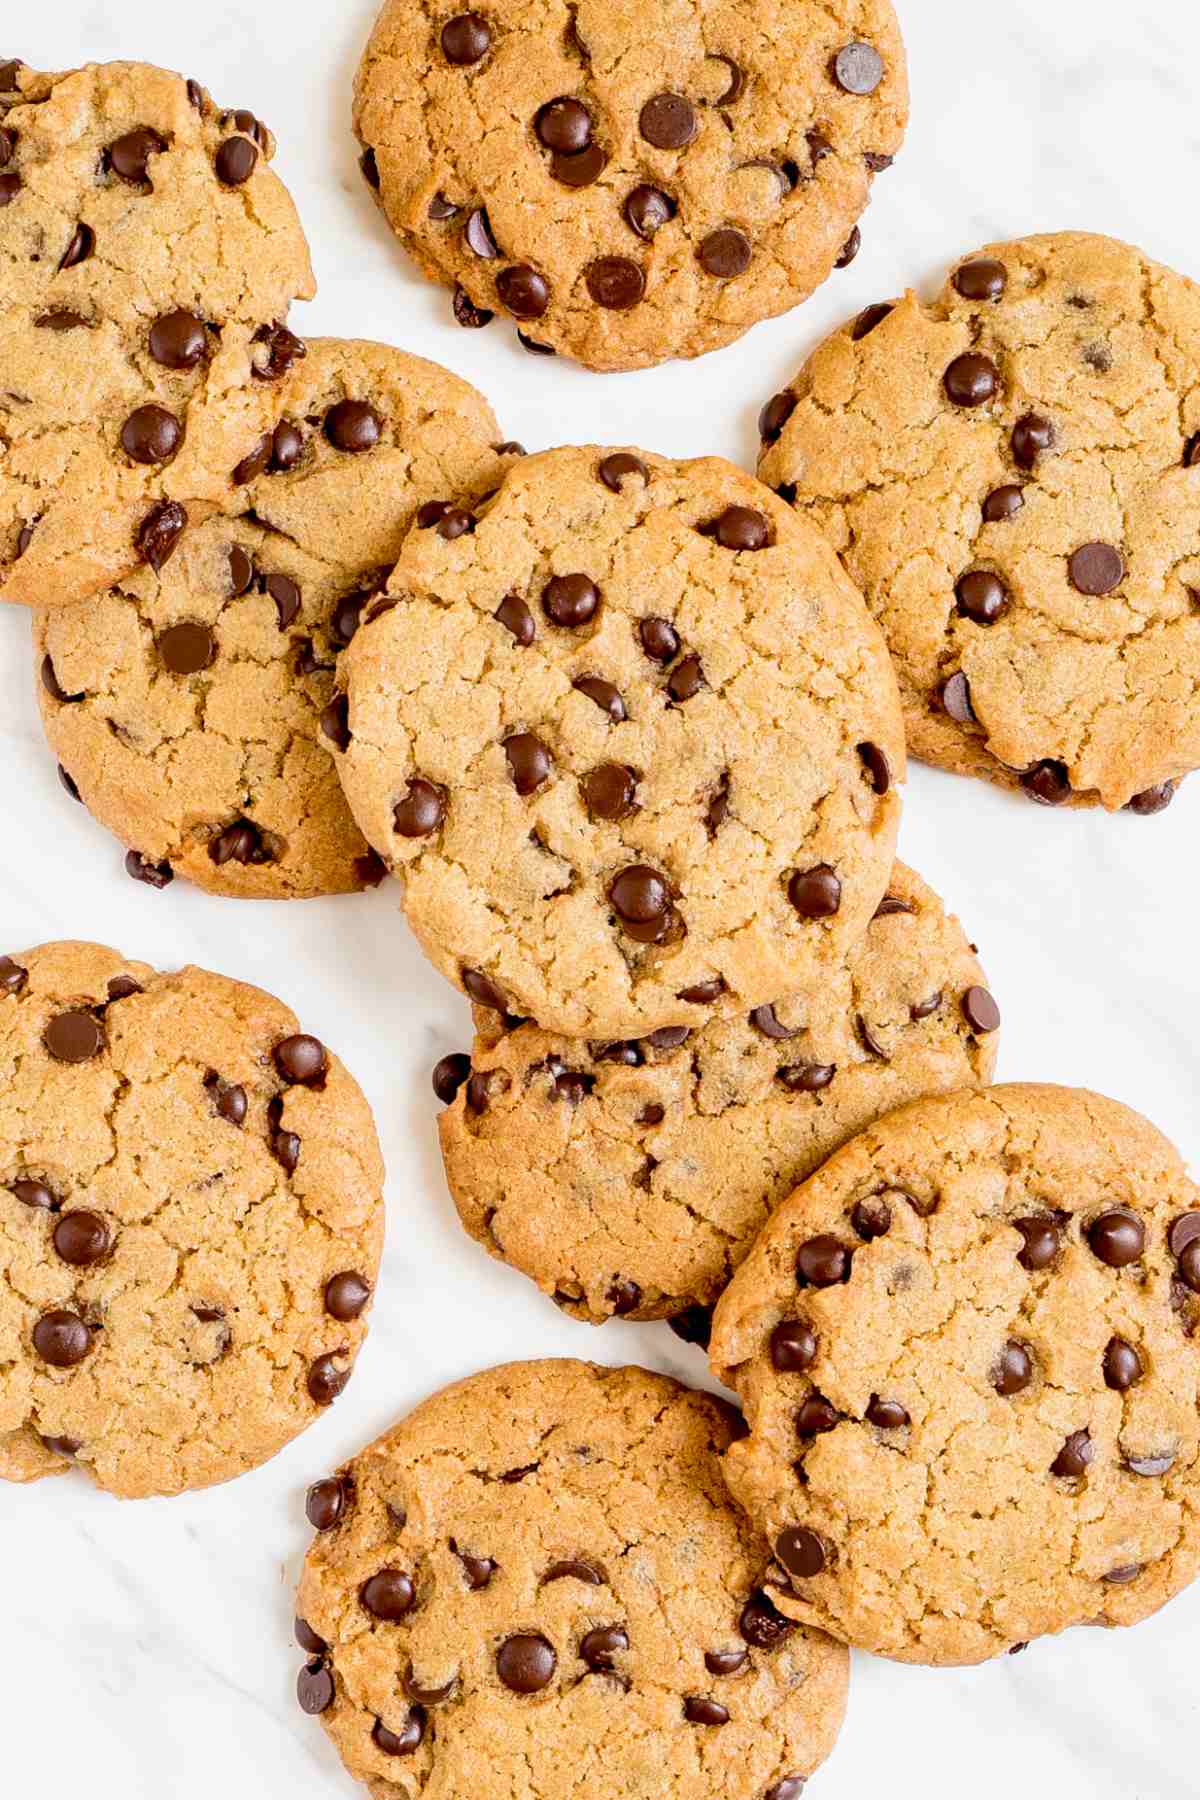 Lots of chocolate chip cookies on a white wooden surface.